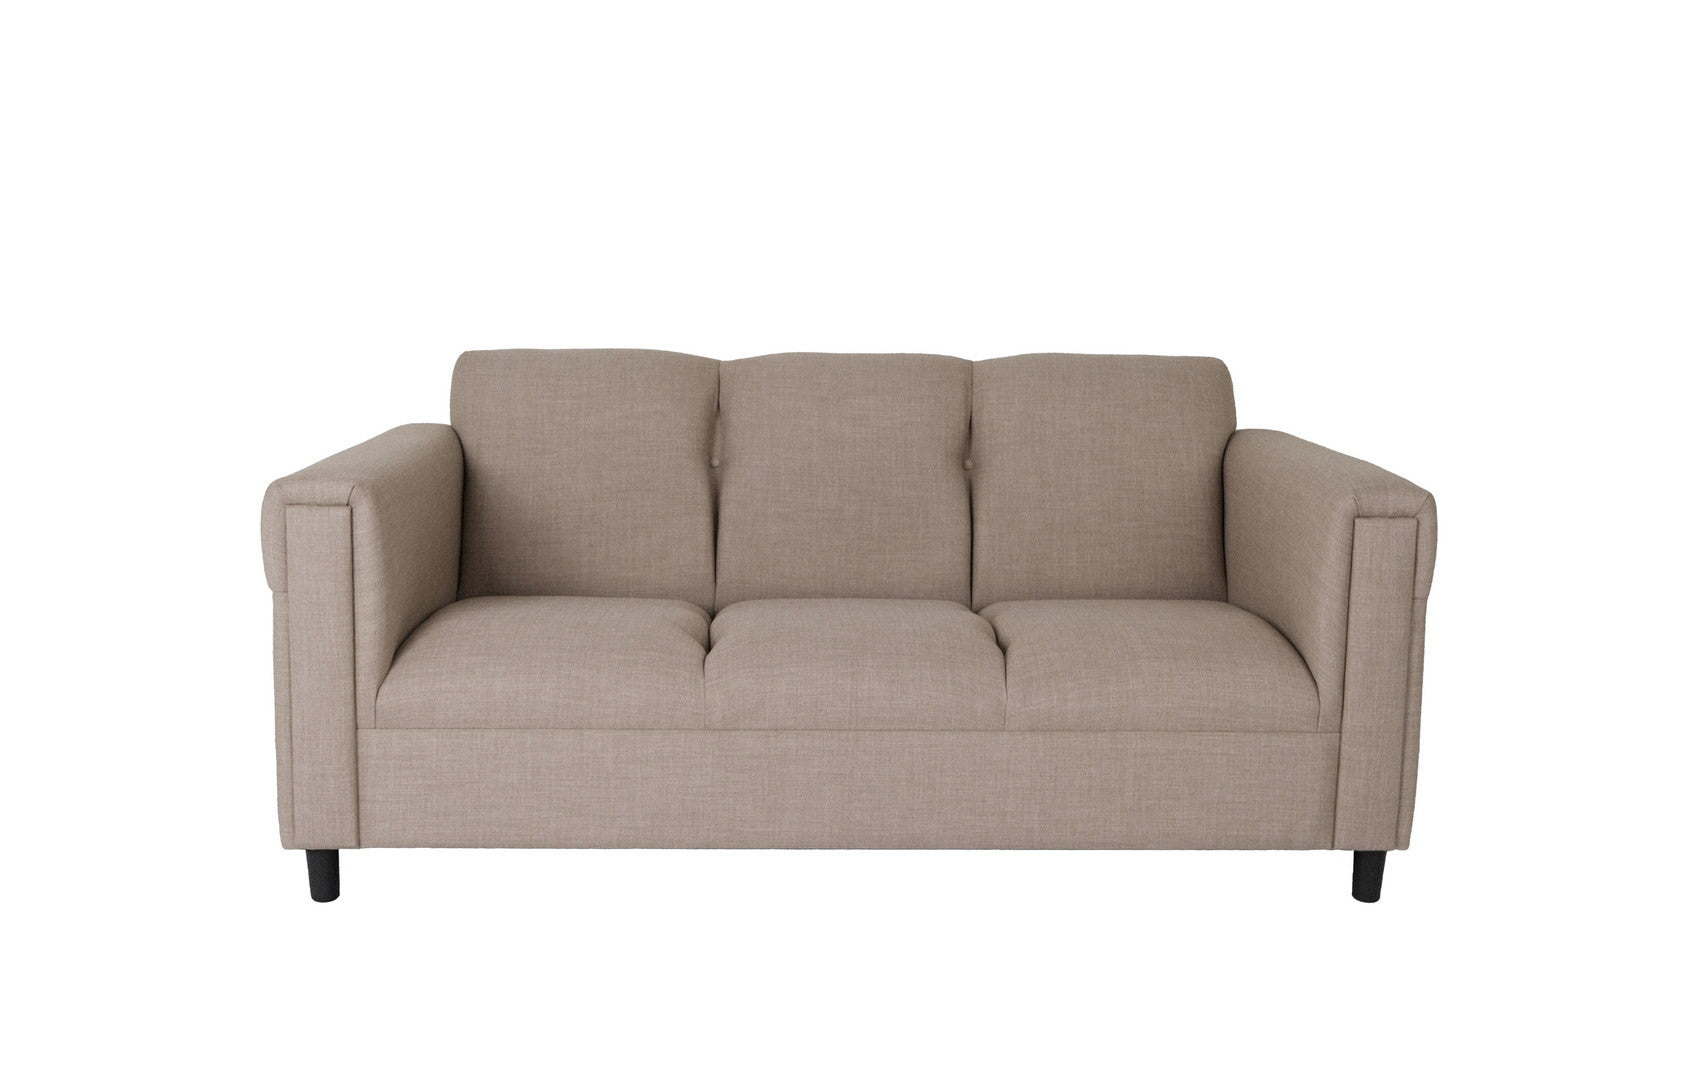 72" Beige And Black Polyester Sofa